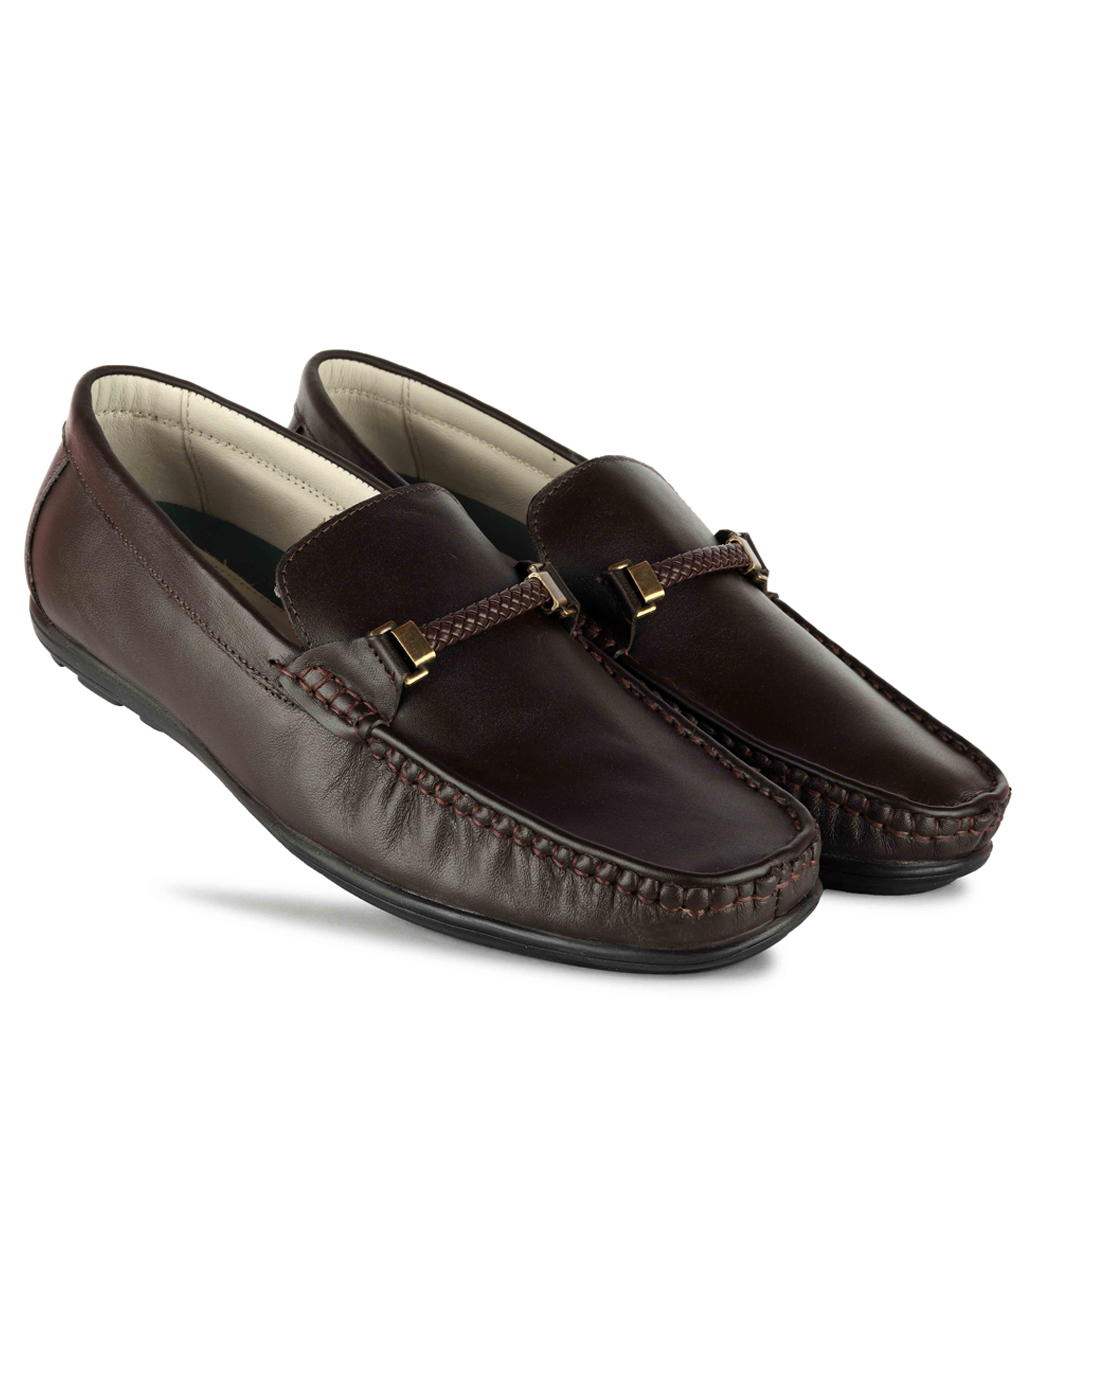 Brown Loafers - Buy Brown Pure Leather Loafers @ Rs.1800 Only | Agra ...